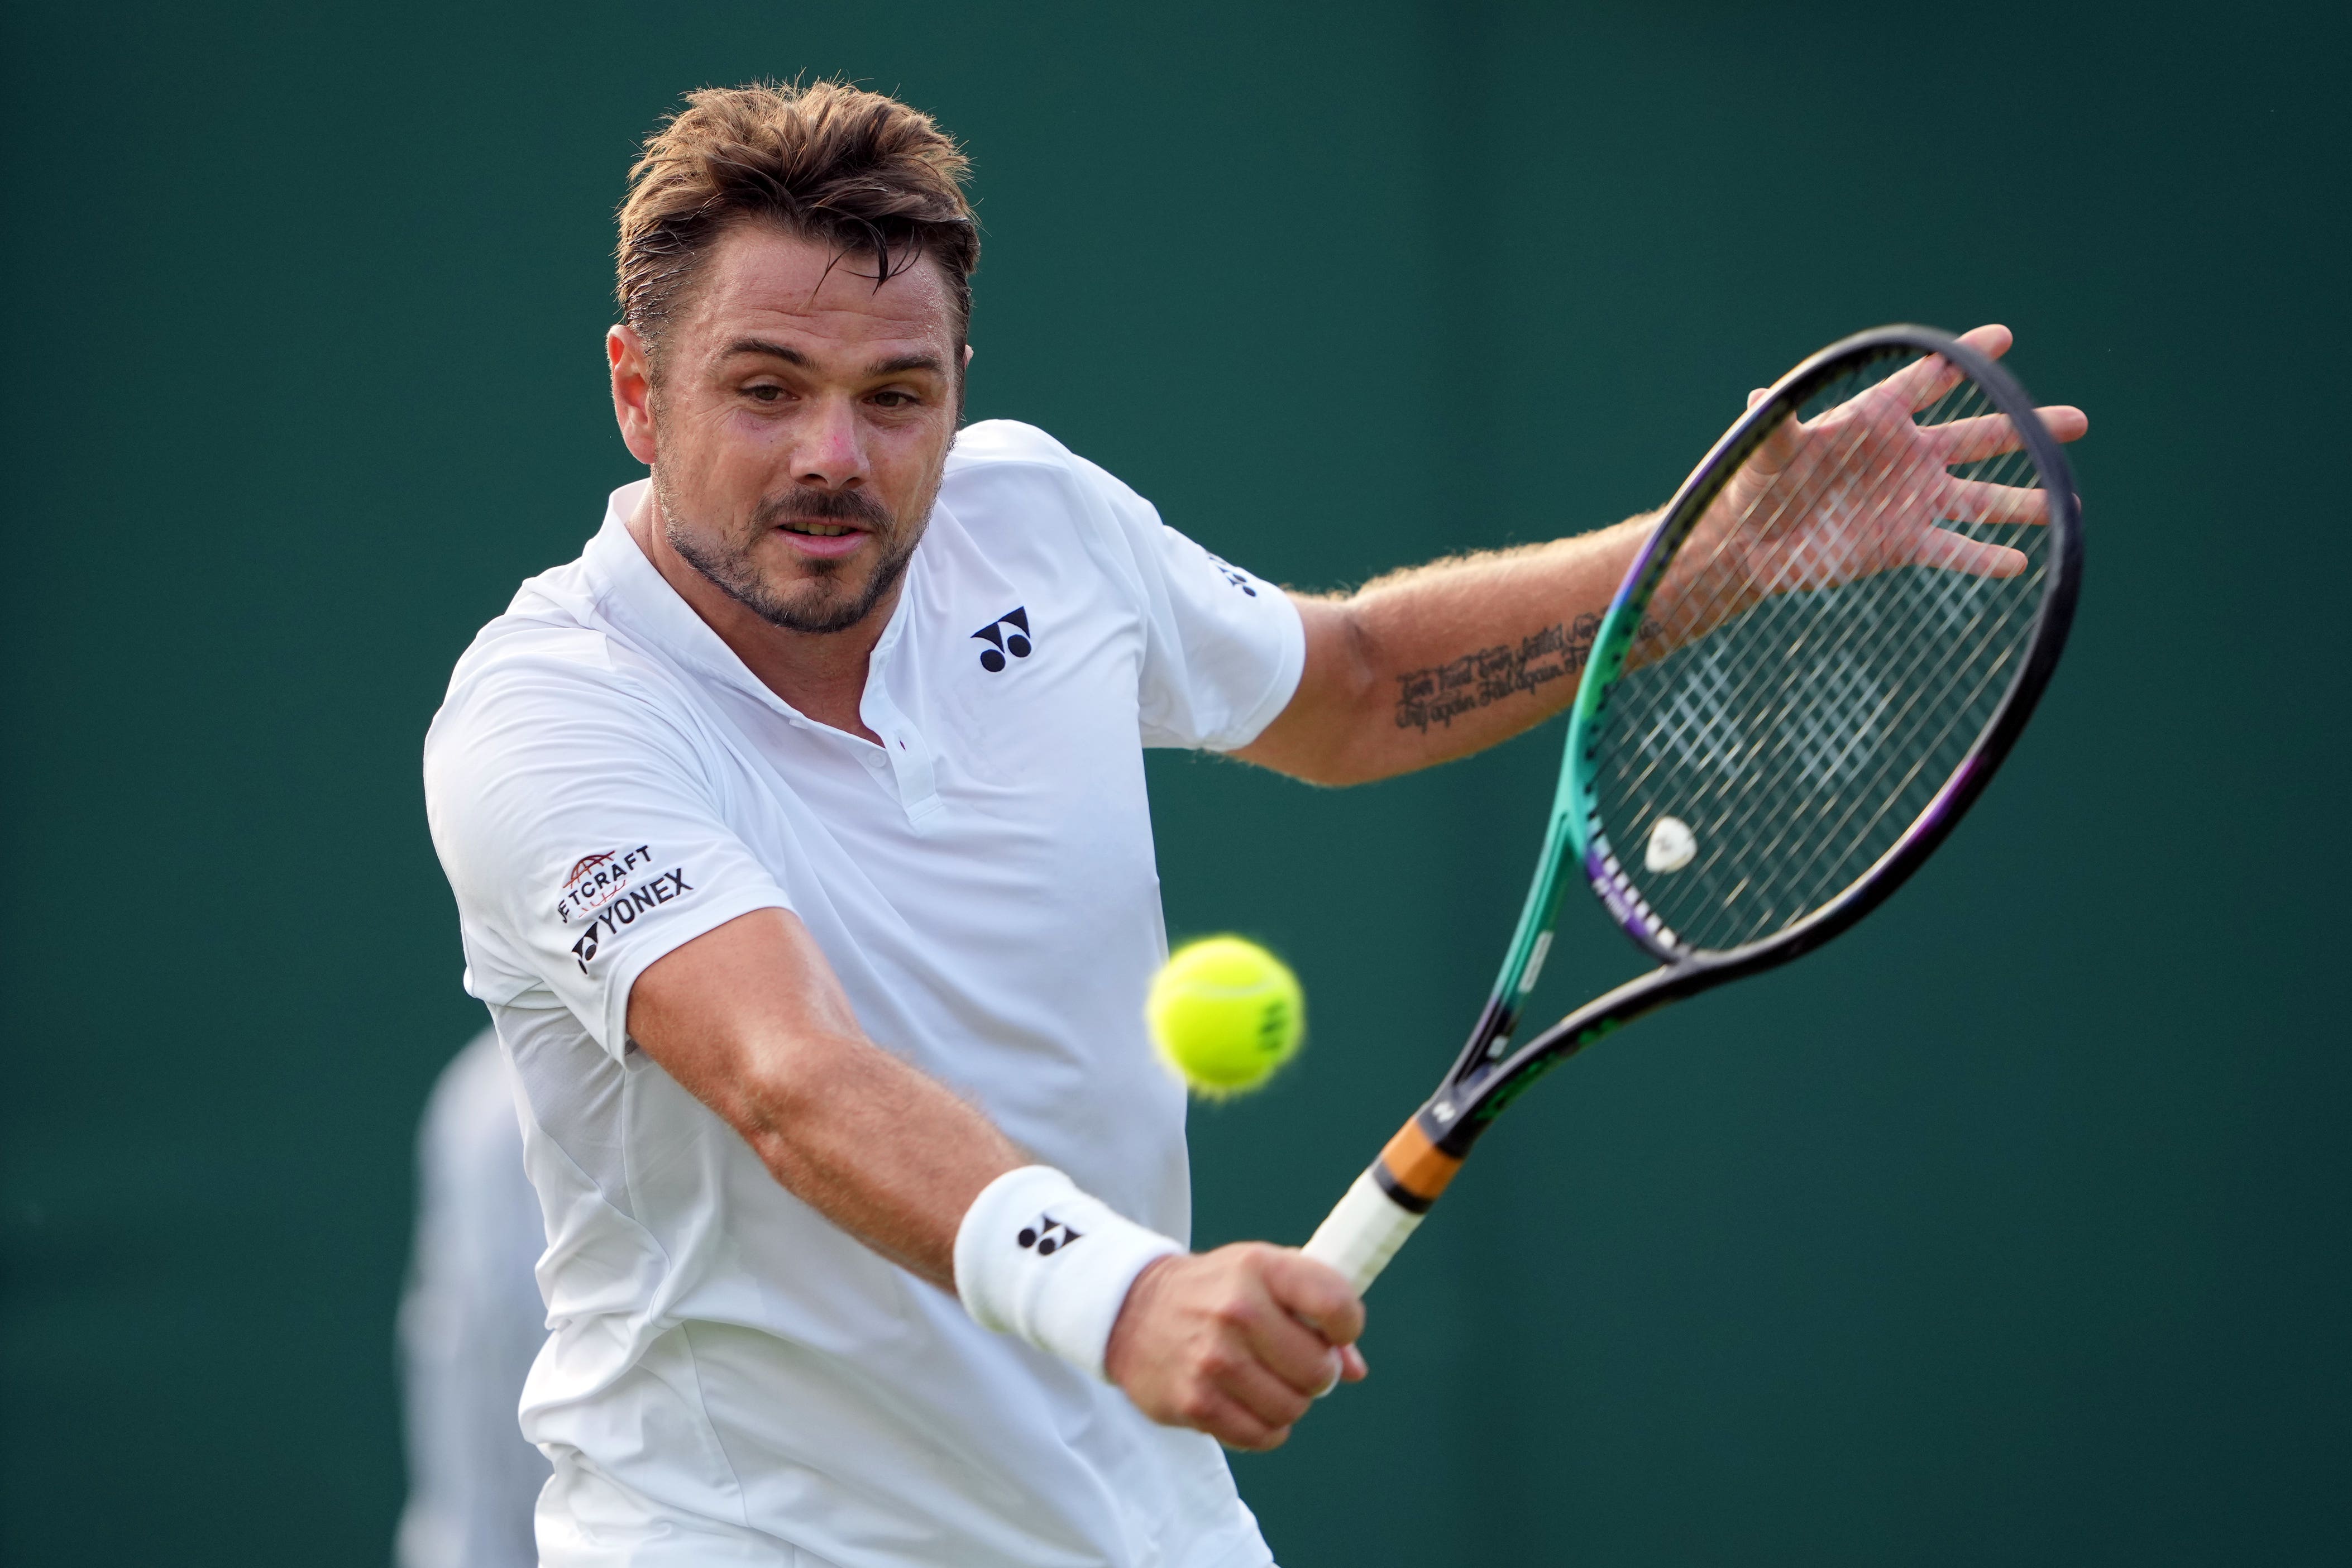 Stan Wawrinka on setbacks, preparing for Wimbledon and friendship with Roger Federer The Independent